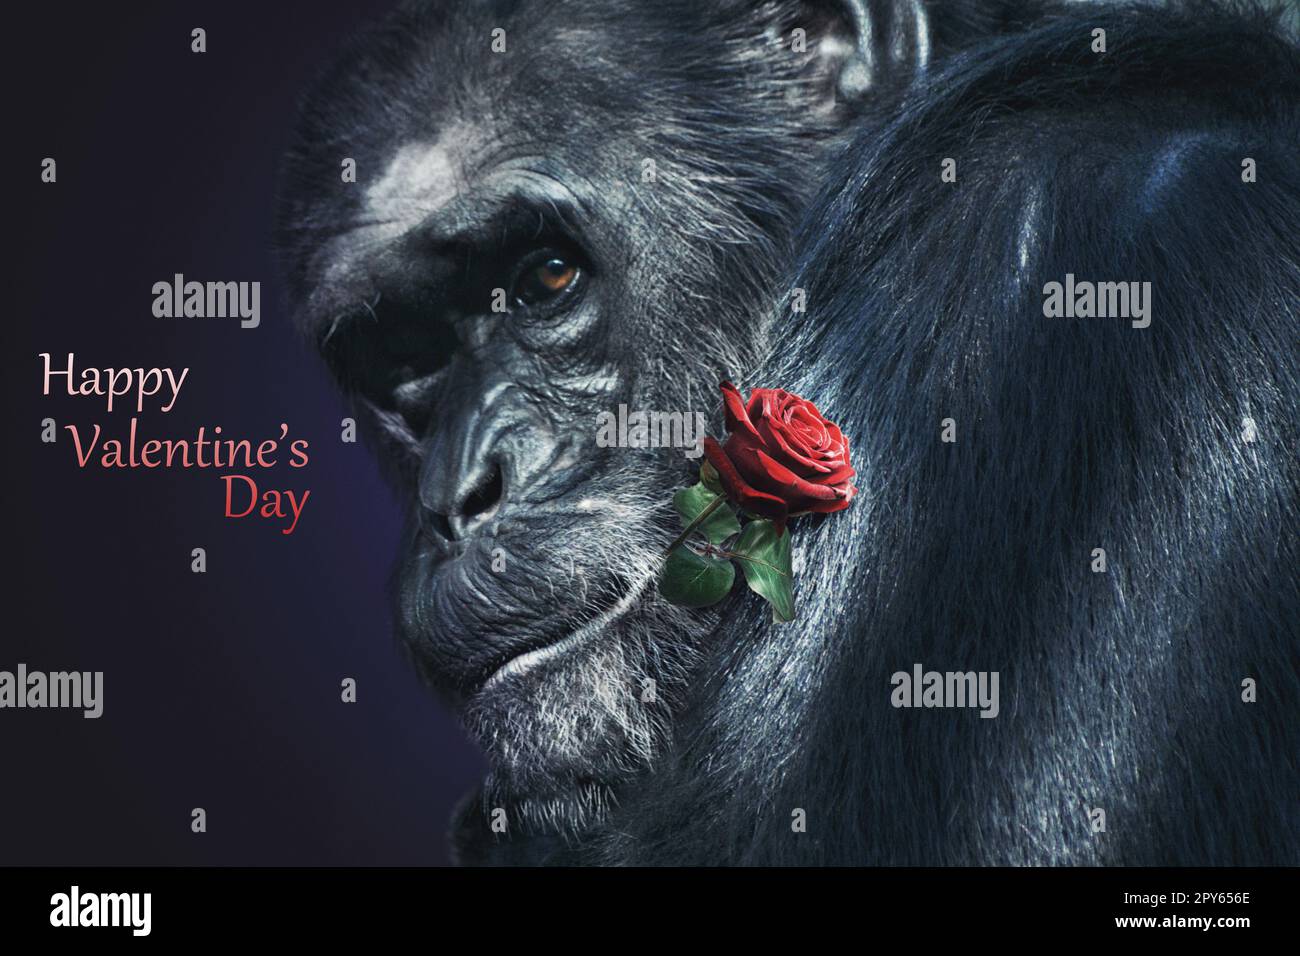 Wild gorilla with rose flower in the mouth. Valentine's Day gift. Stock Photo